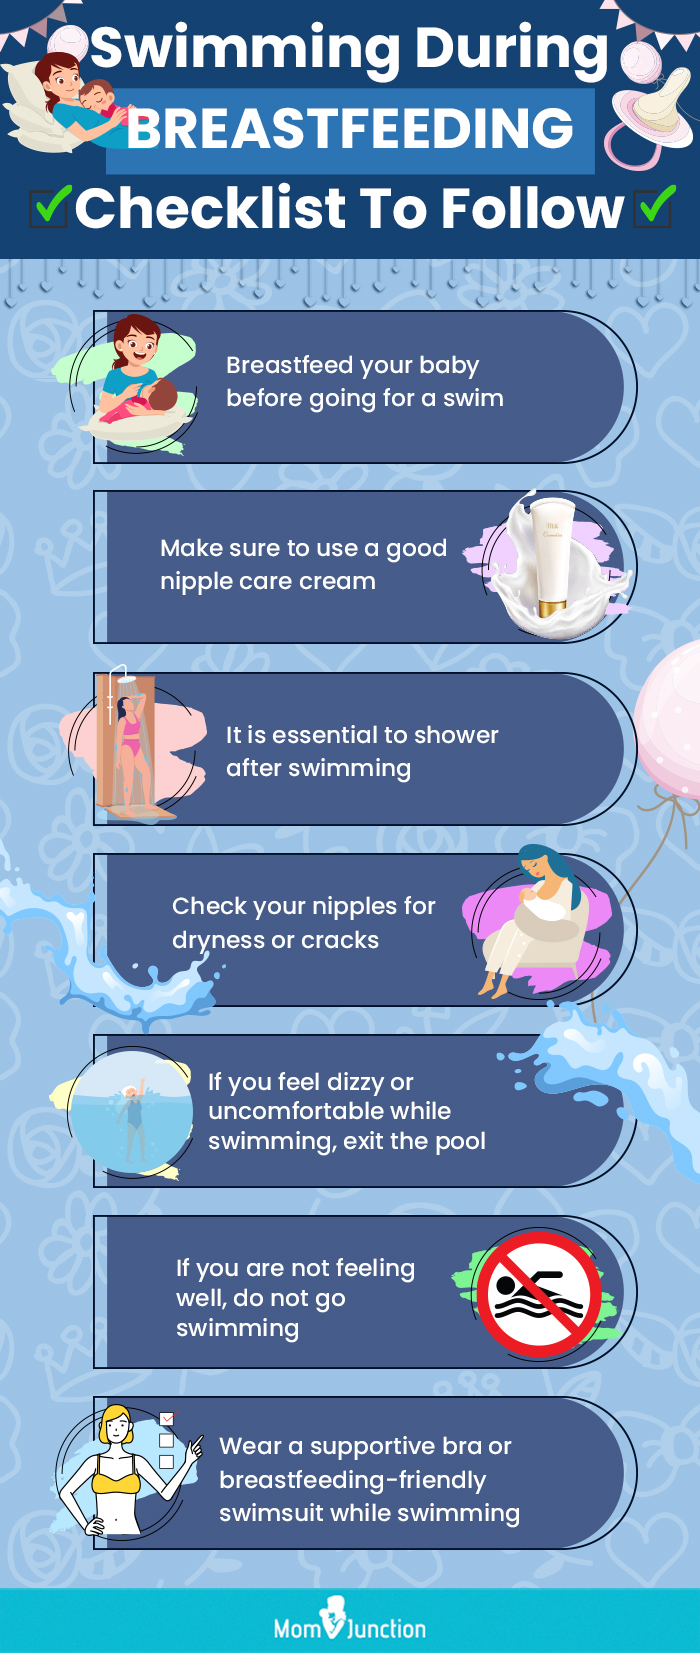 https://www.momjunction.com/wp-content/uploads/2023/01/Swimming-During-Breastfeeding-Checklist-To-Follow.jpg